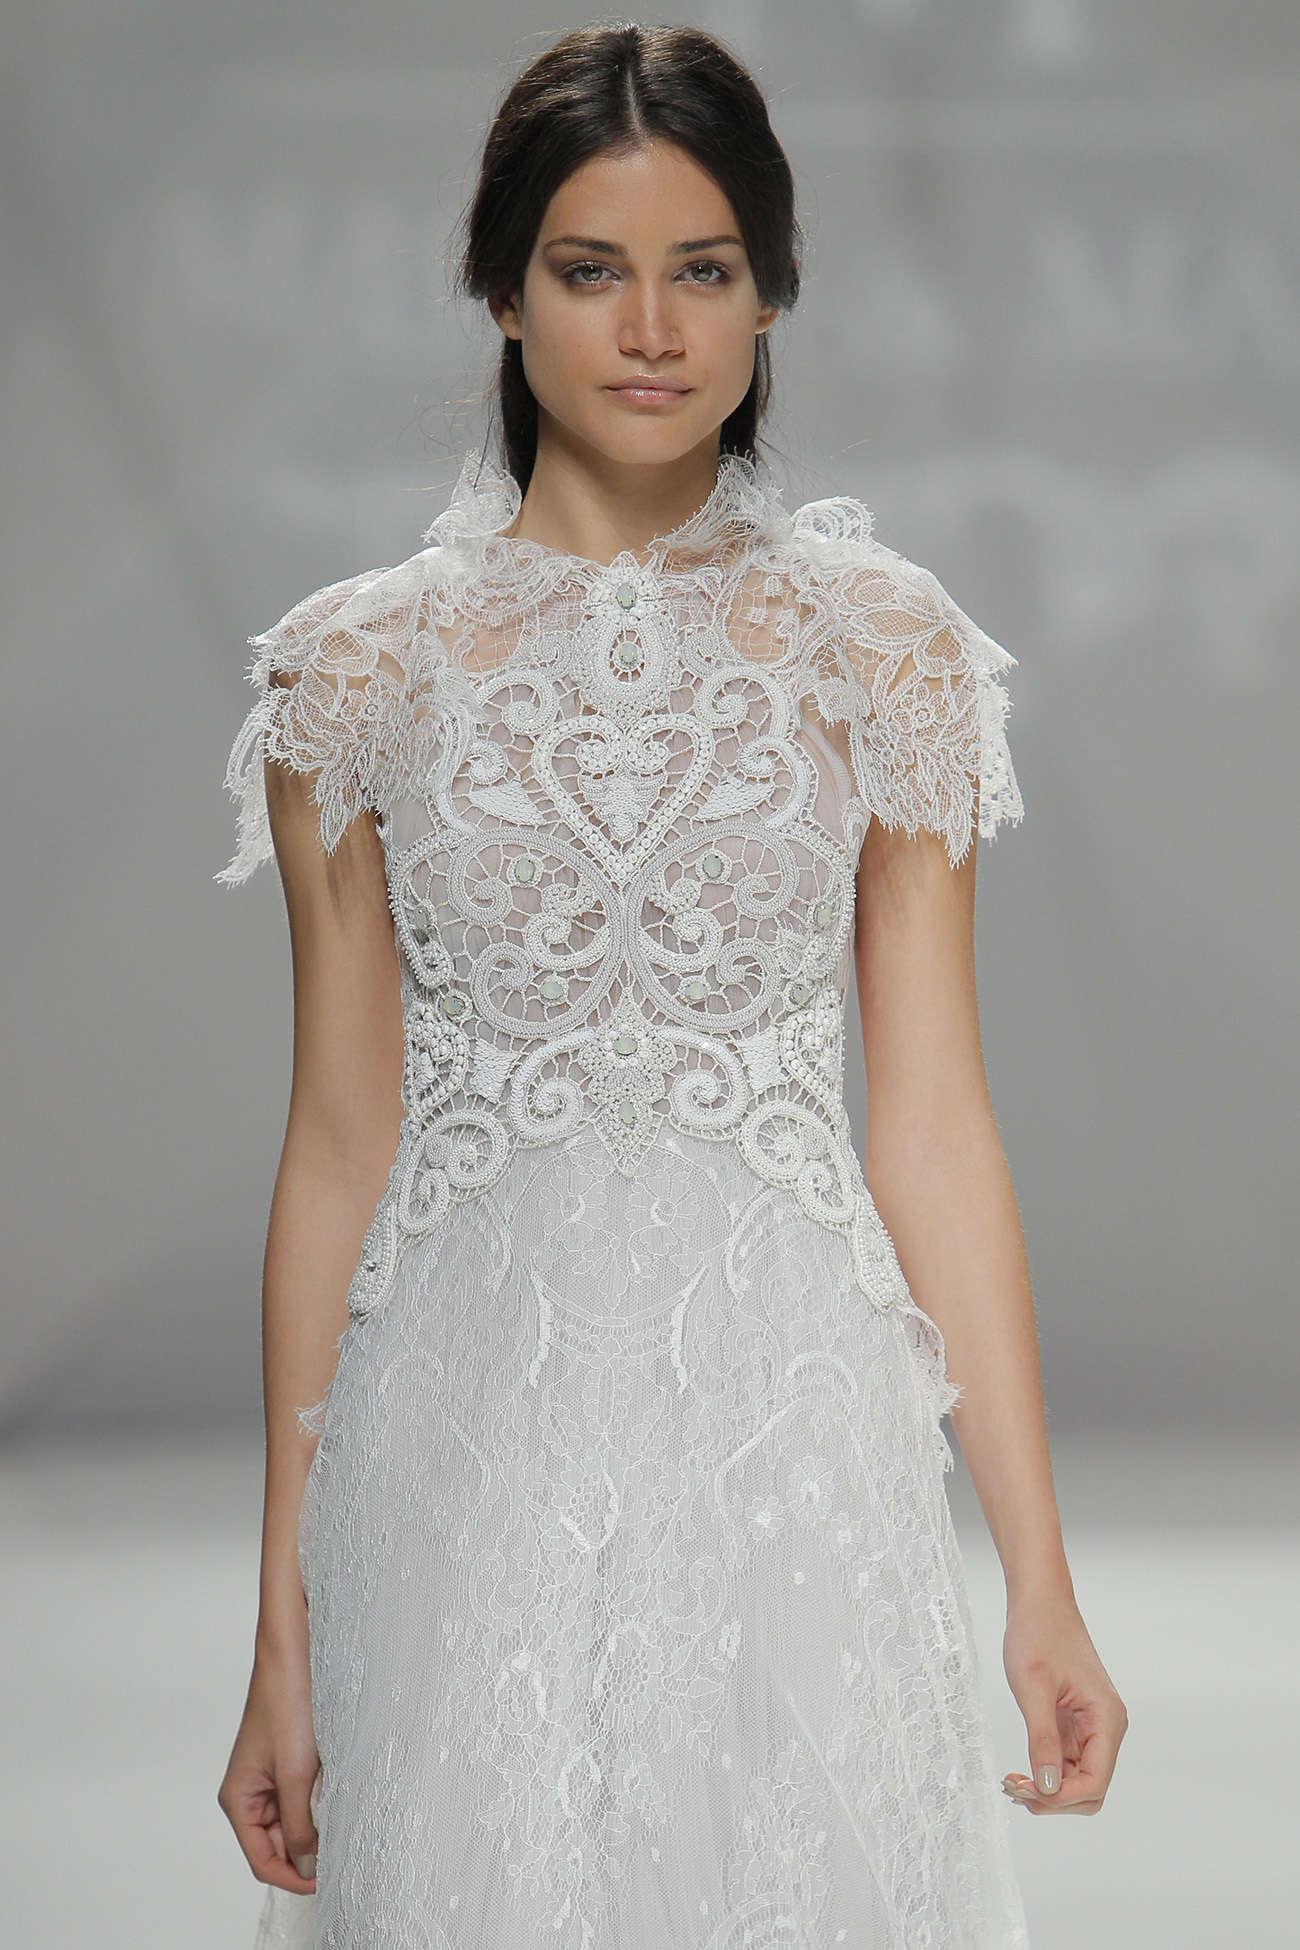 Lace and Tulle Wedding Dresses from Barcelona Bridal Week